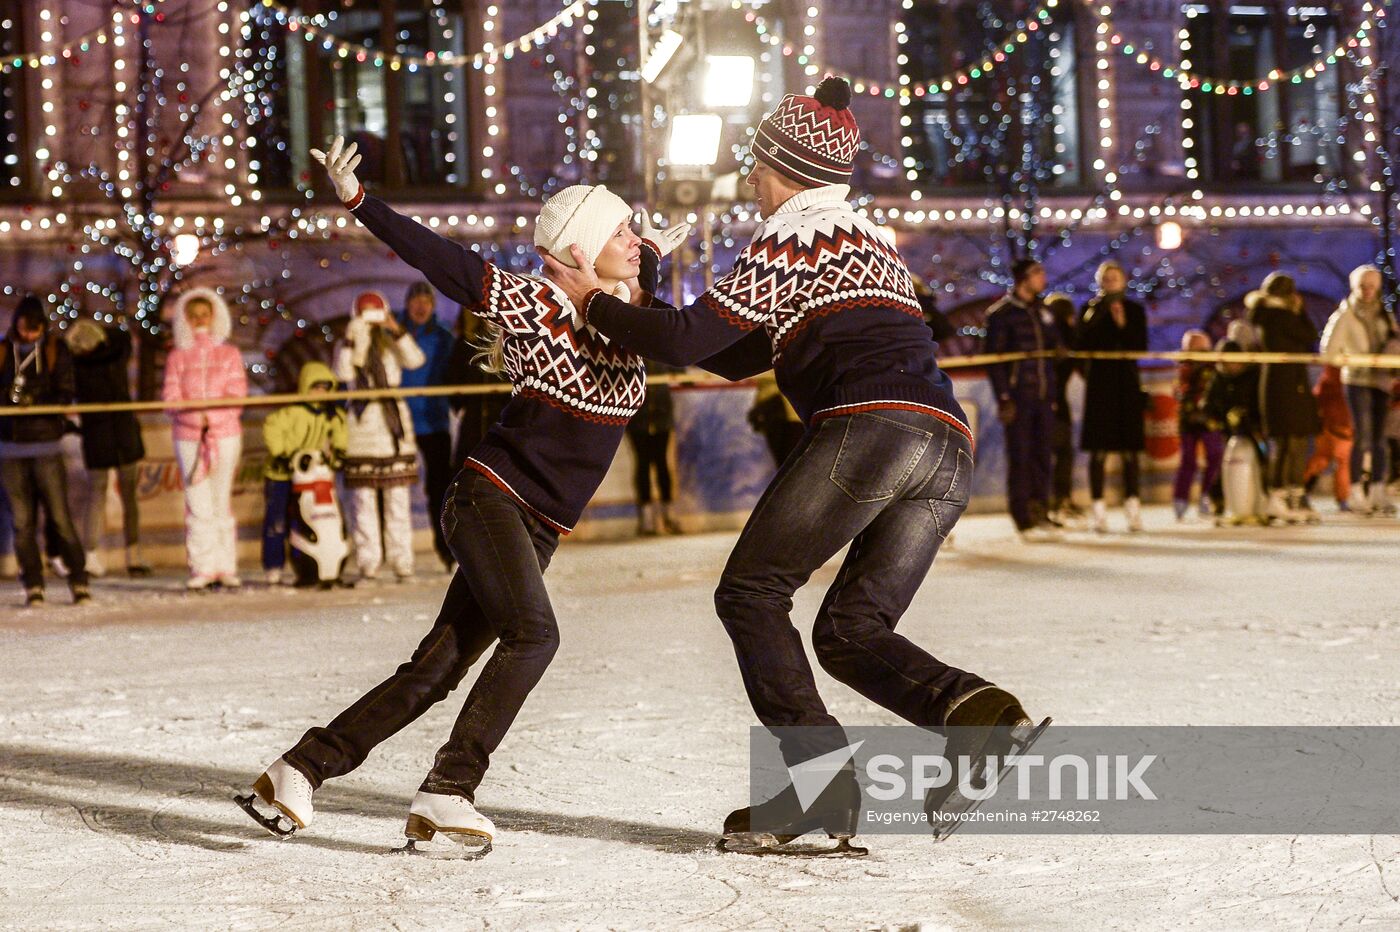 GUM Skating Rink and GUM Fair open at Red Square